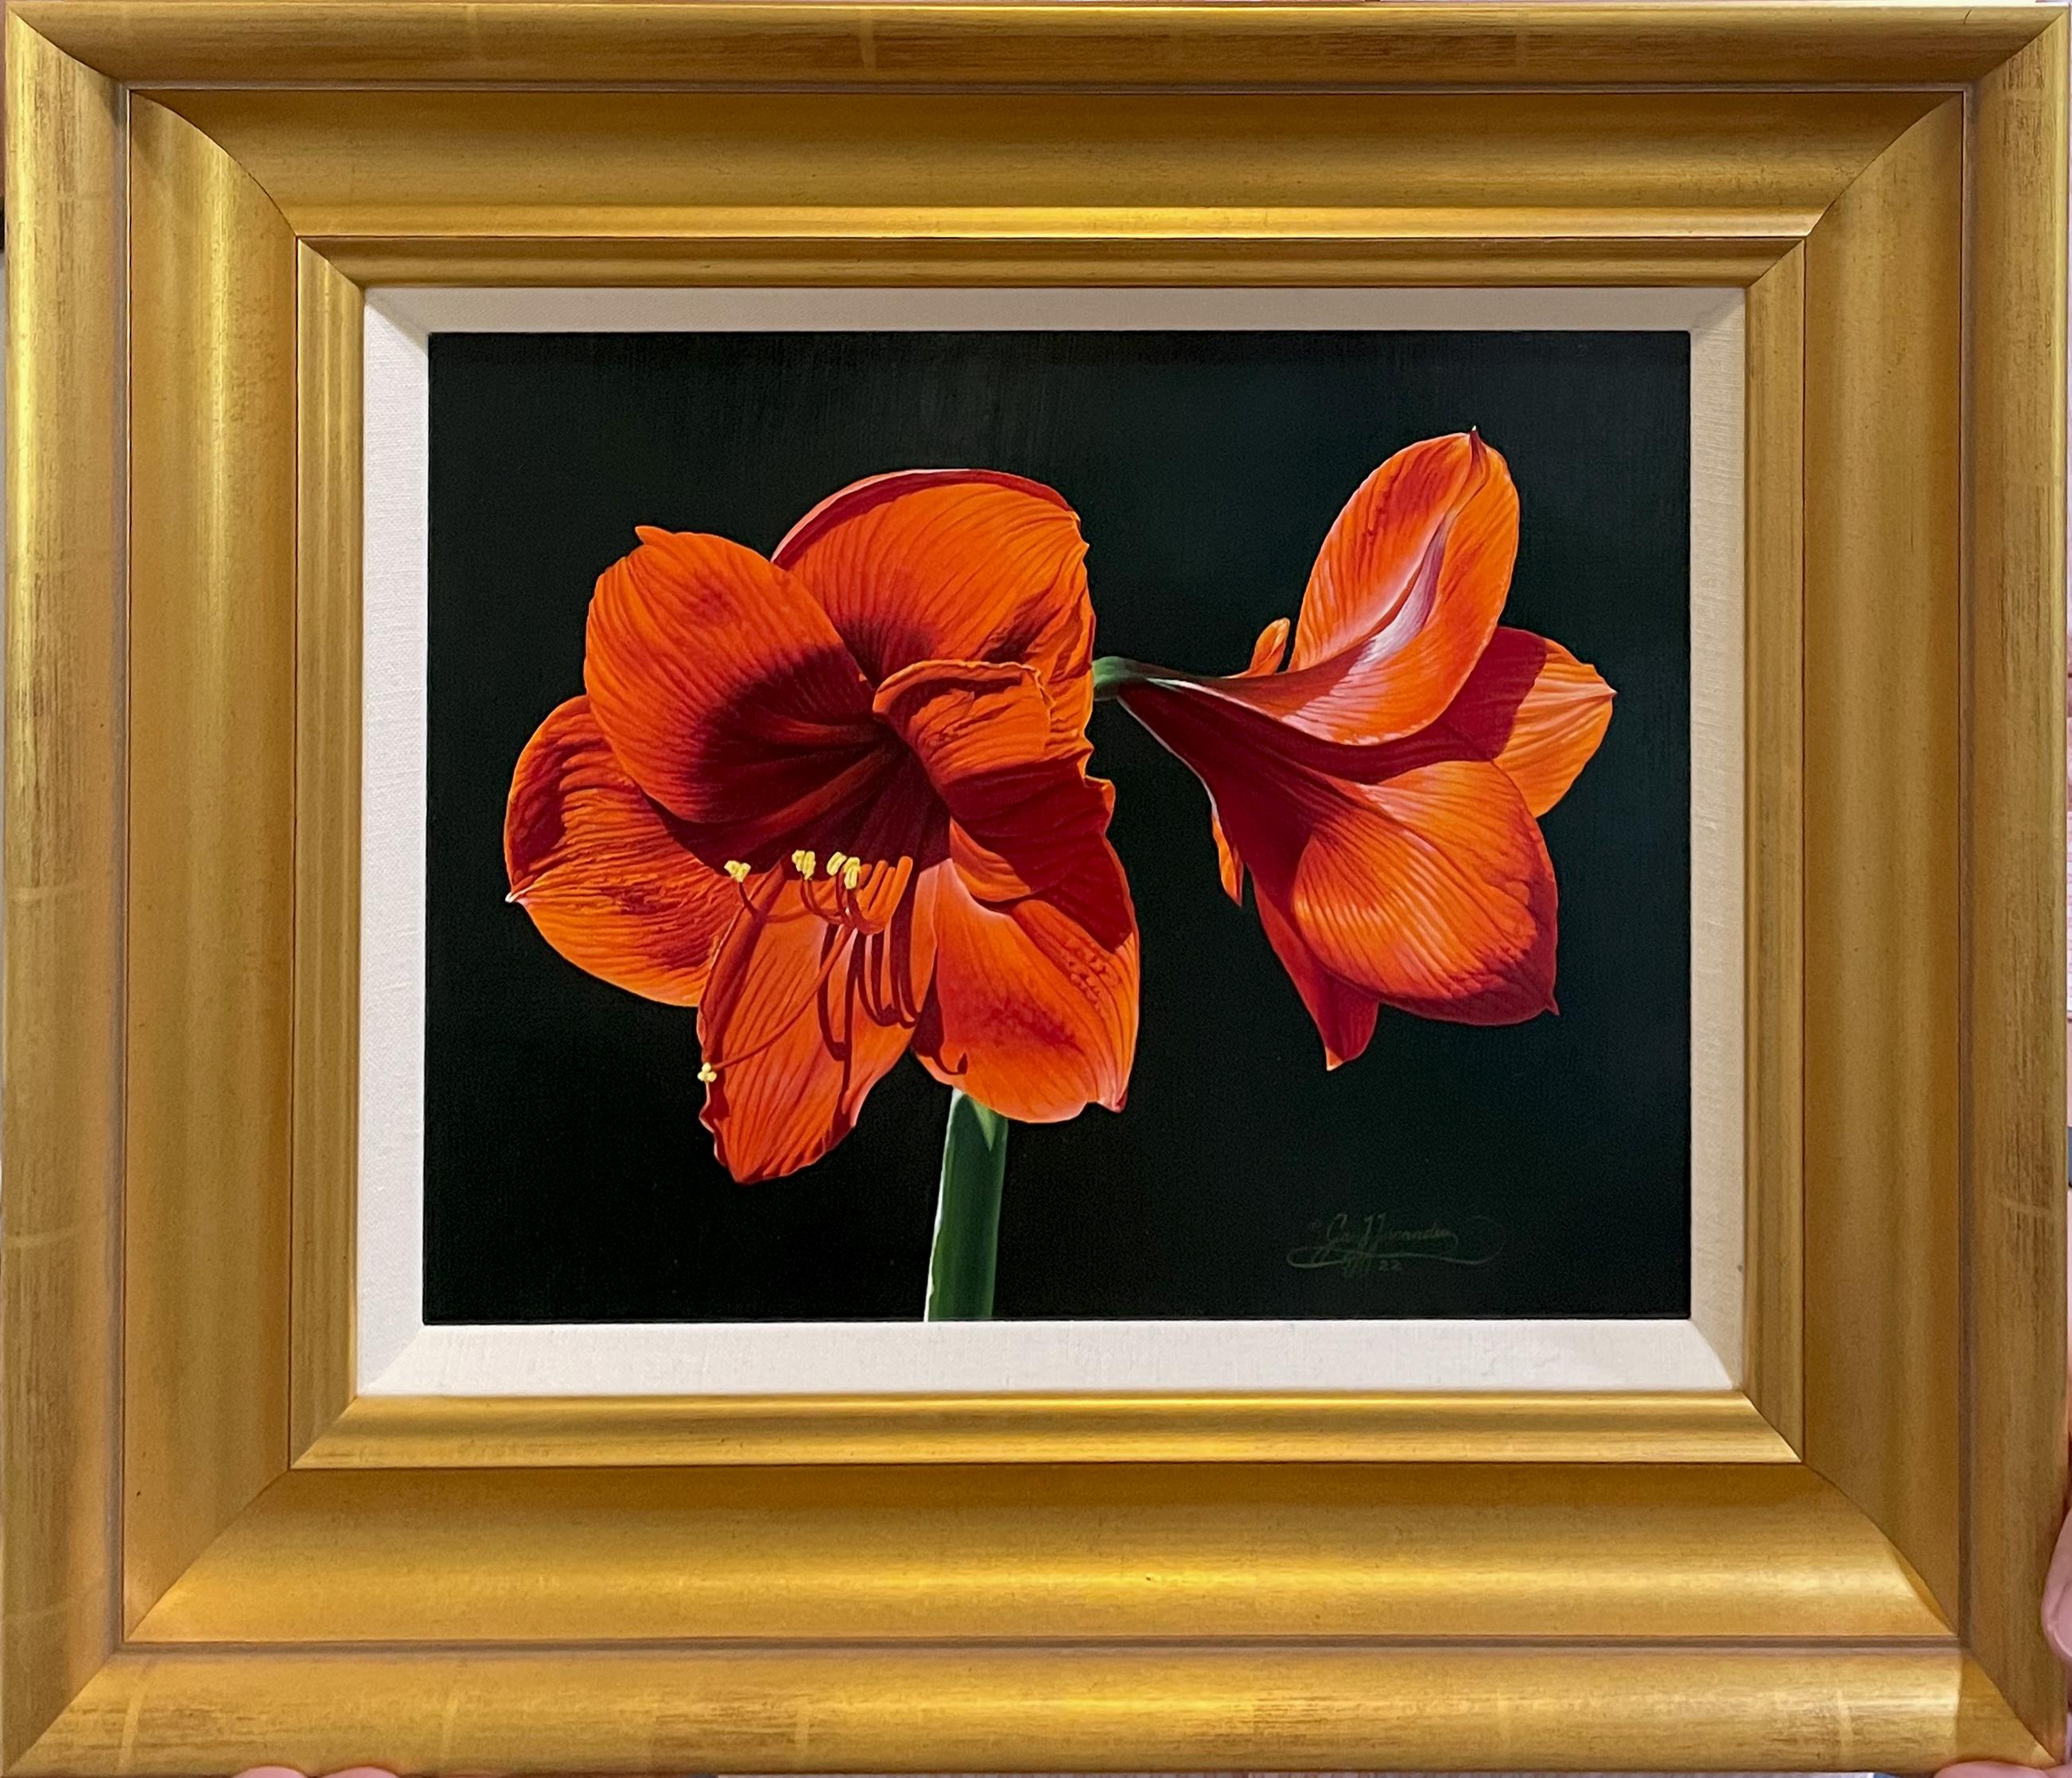 Red Amaryllis  is painted in the style of American Realism.  Red Amaryllis has a custom archival frame.Red amaryllis symbolizes passion, love and attraction. 
According to Greek mythology, the amaryllis originated from the love Amaryllis had for